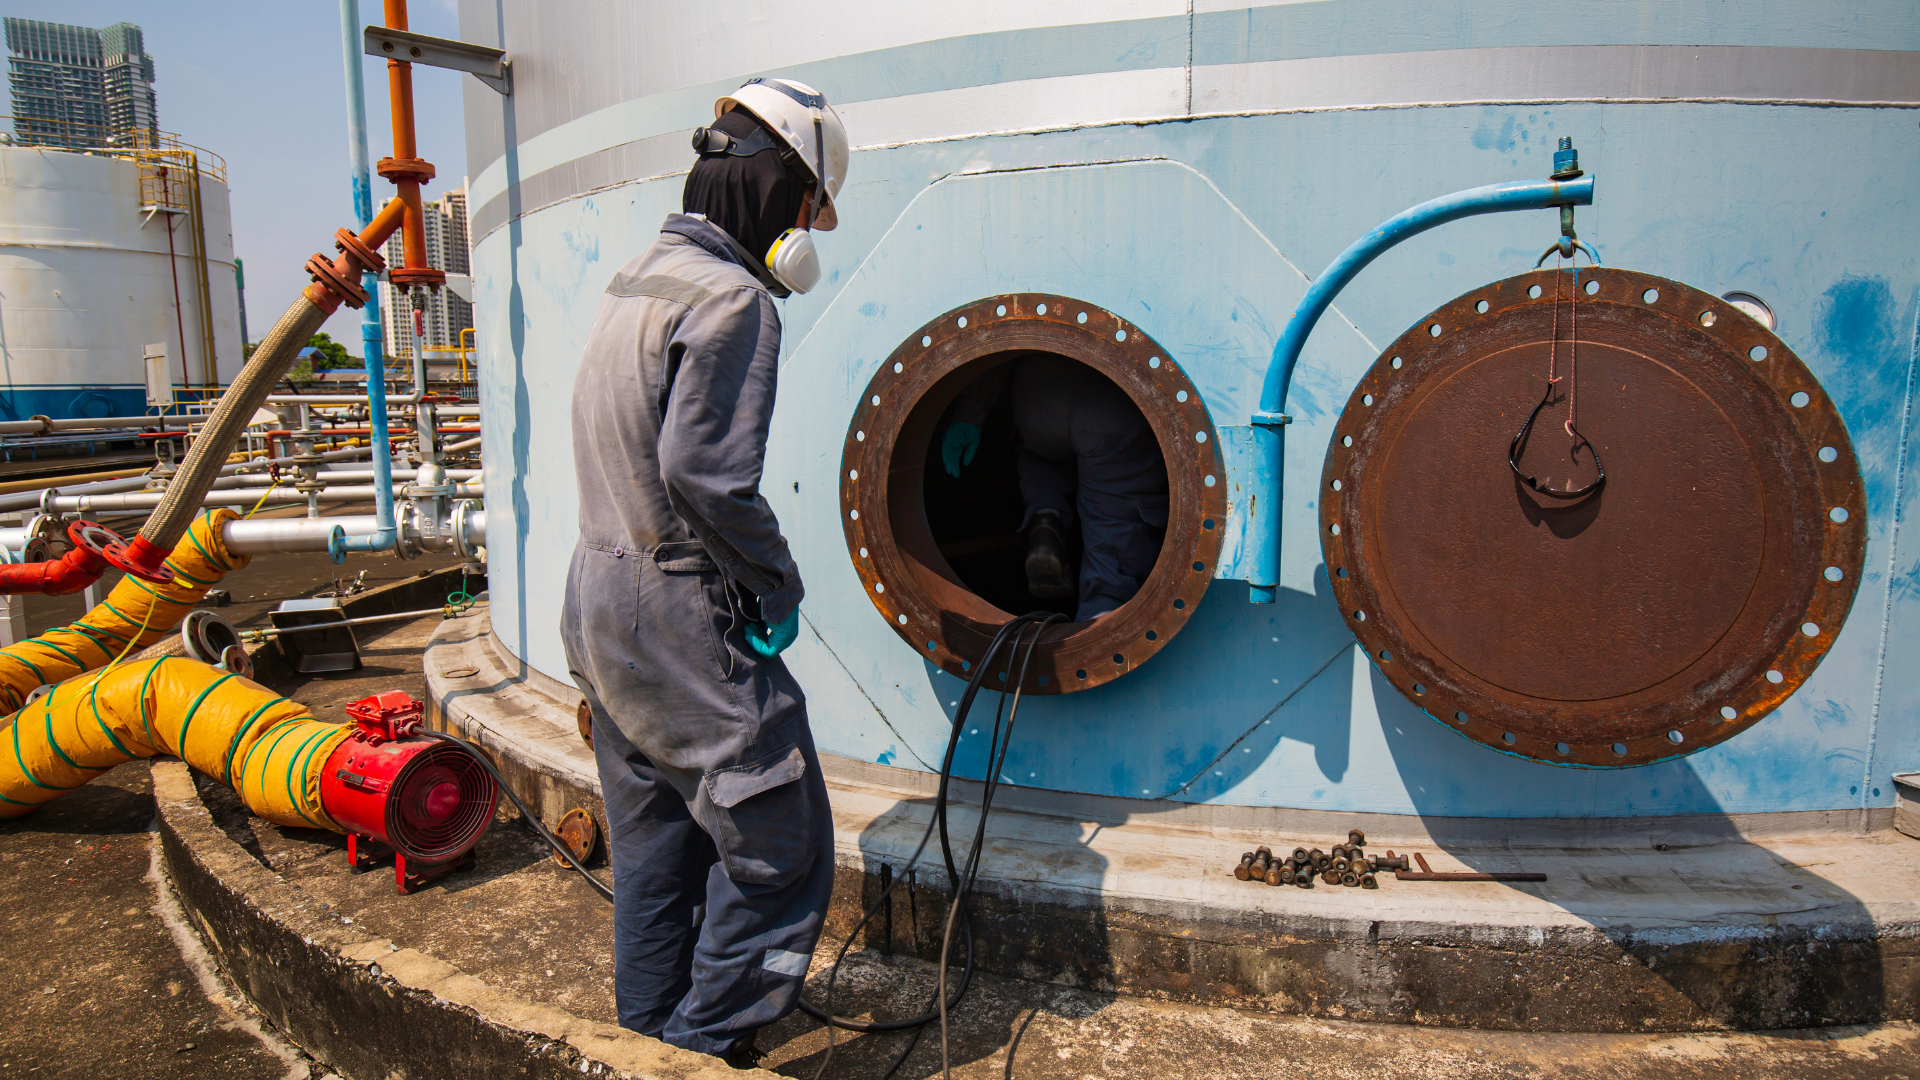 Looking for a Confined Space Entry and Monitor Course in Prince George? We Got You!